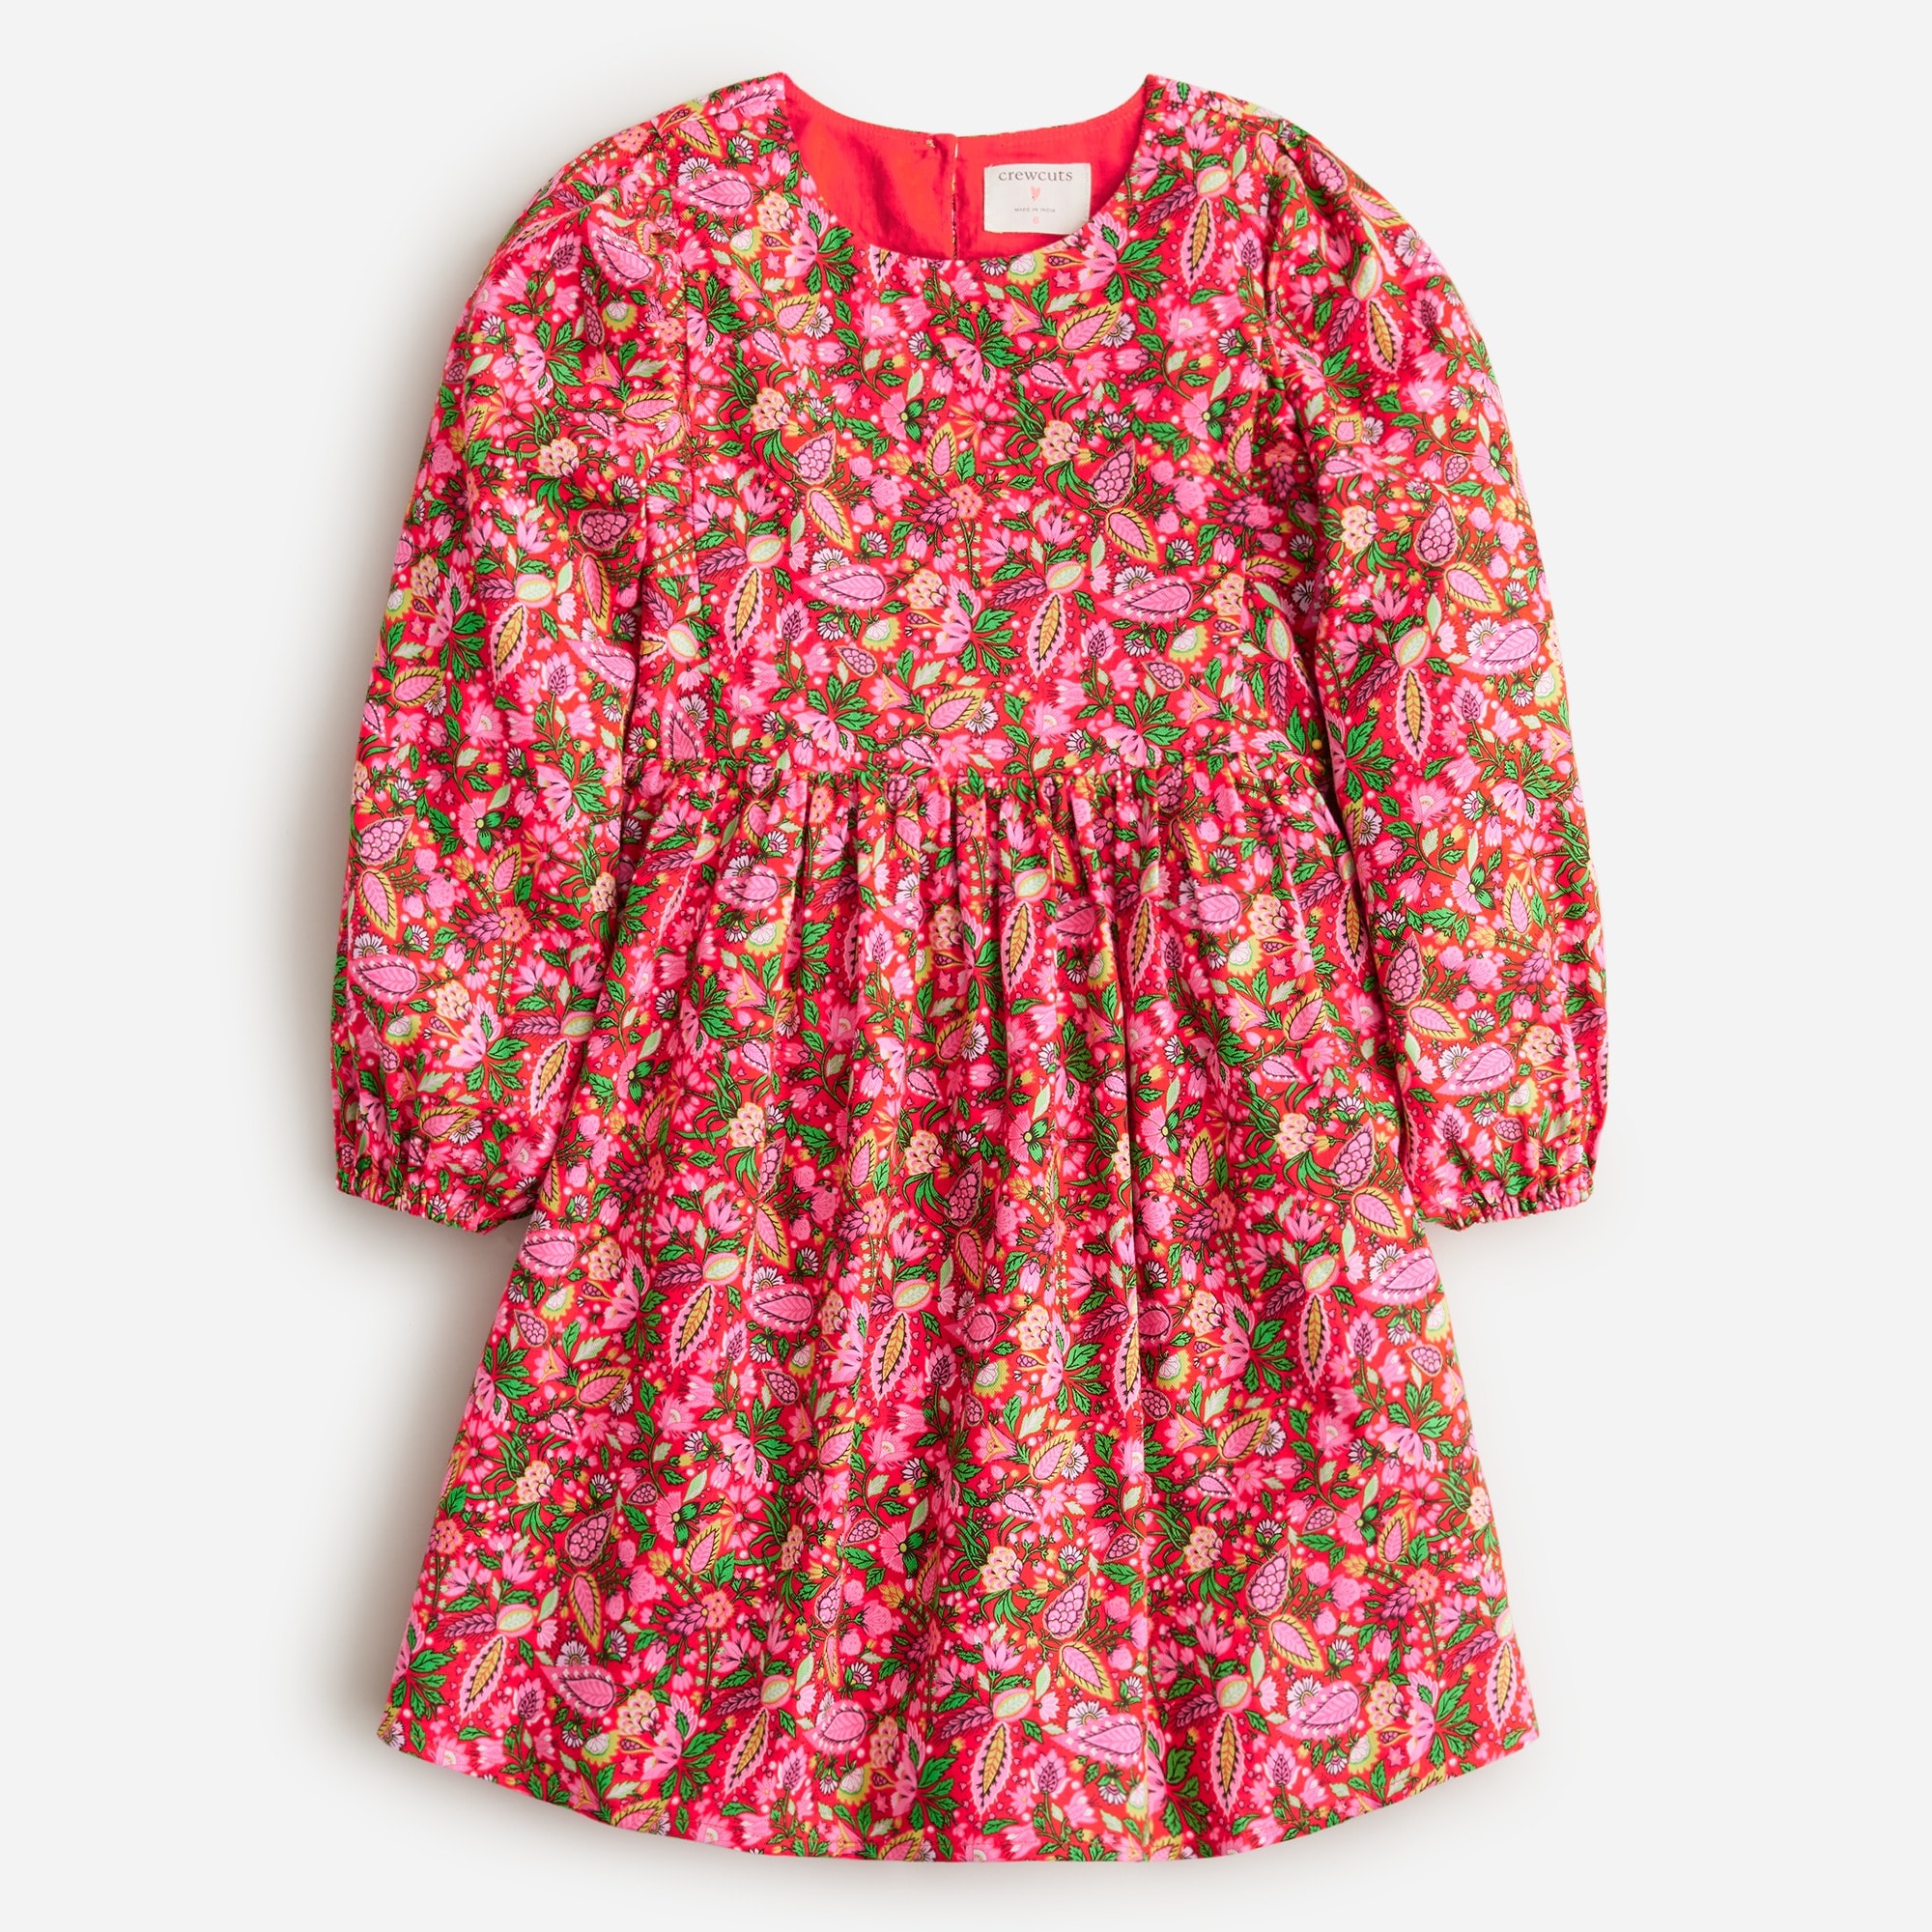  Girls' puff-sleeve dress in floral flannel